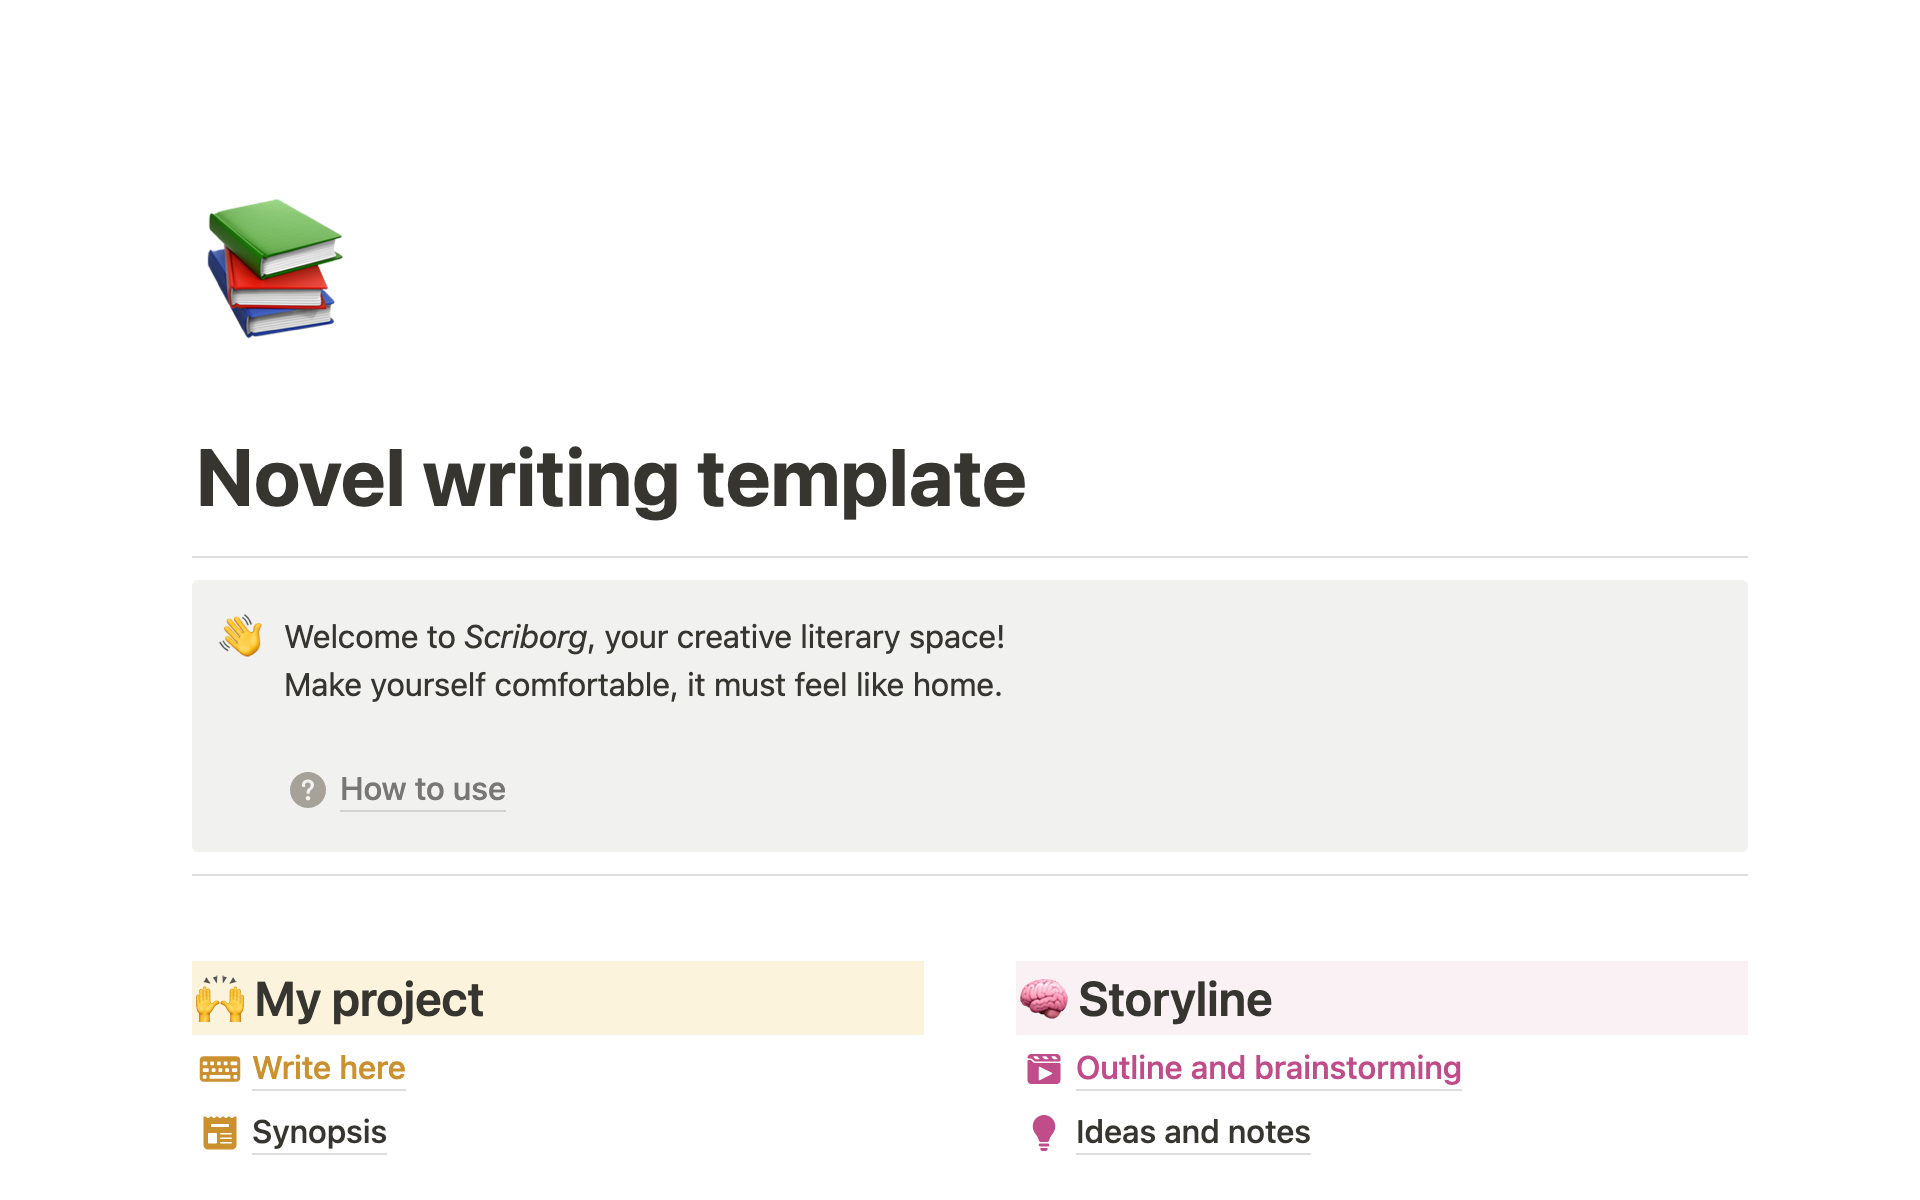 A template preview for Scriborg, the advanced writing novel template